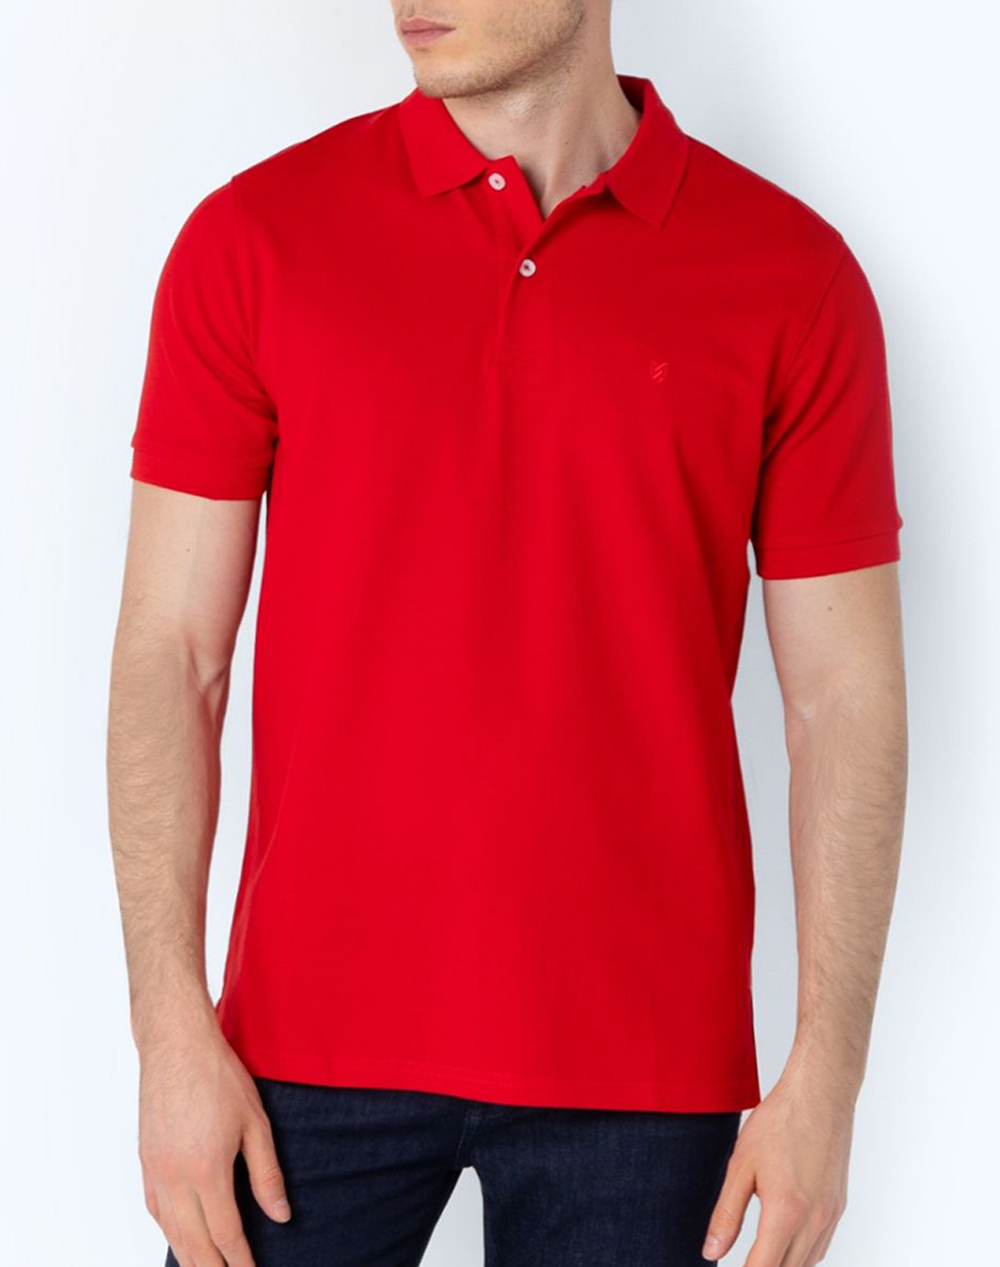 THE BOSTONIANS ΜΠΛΟΥΖΑ POLO PIQUE REGULAR FIT 3PS0001-Pomegranate FireRed